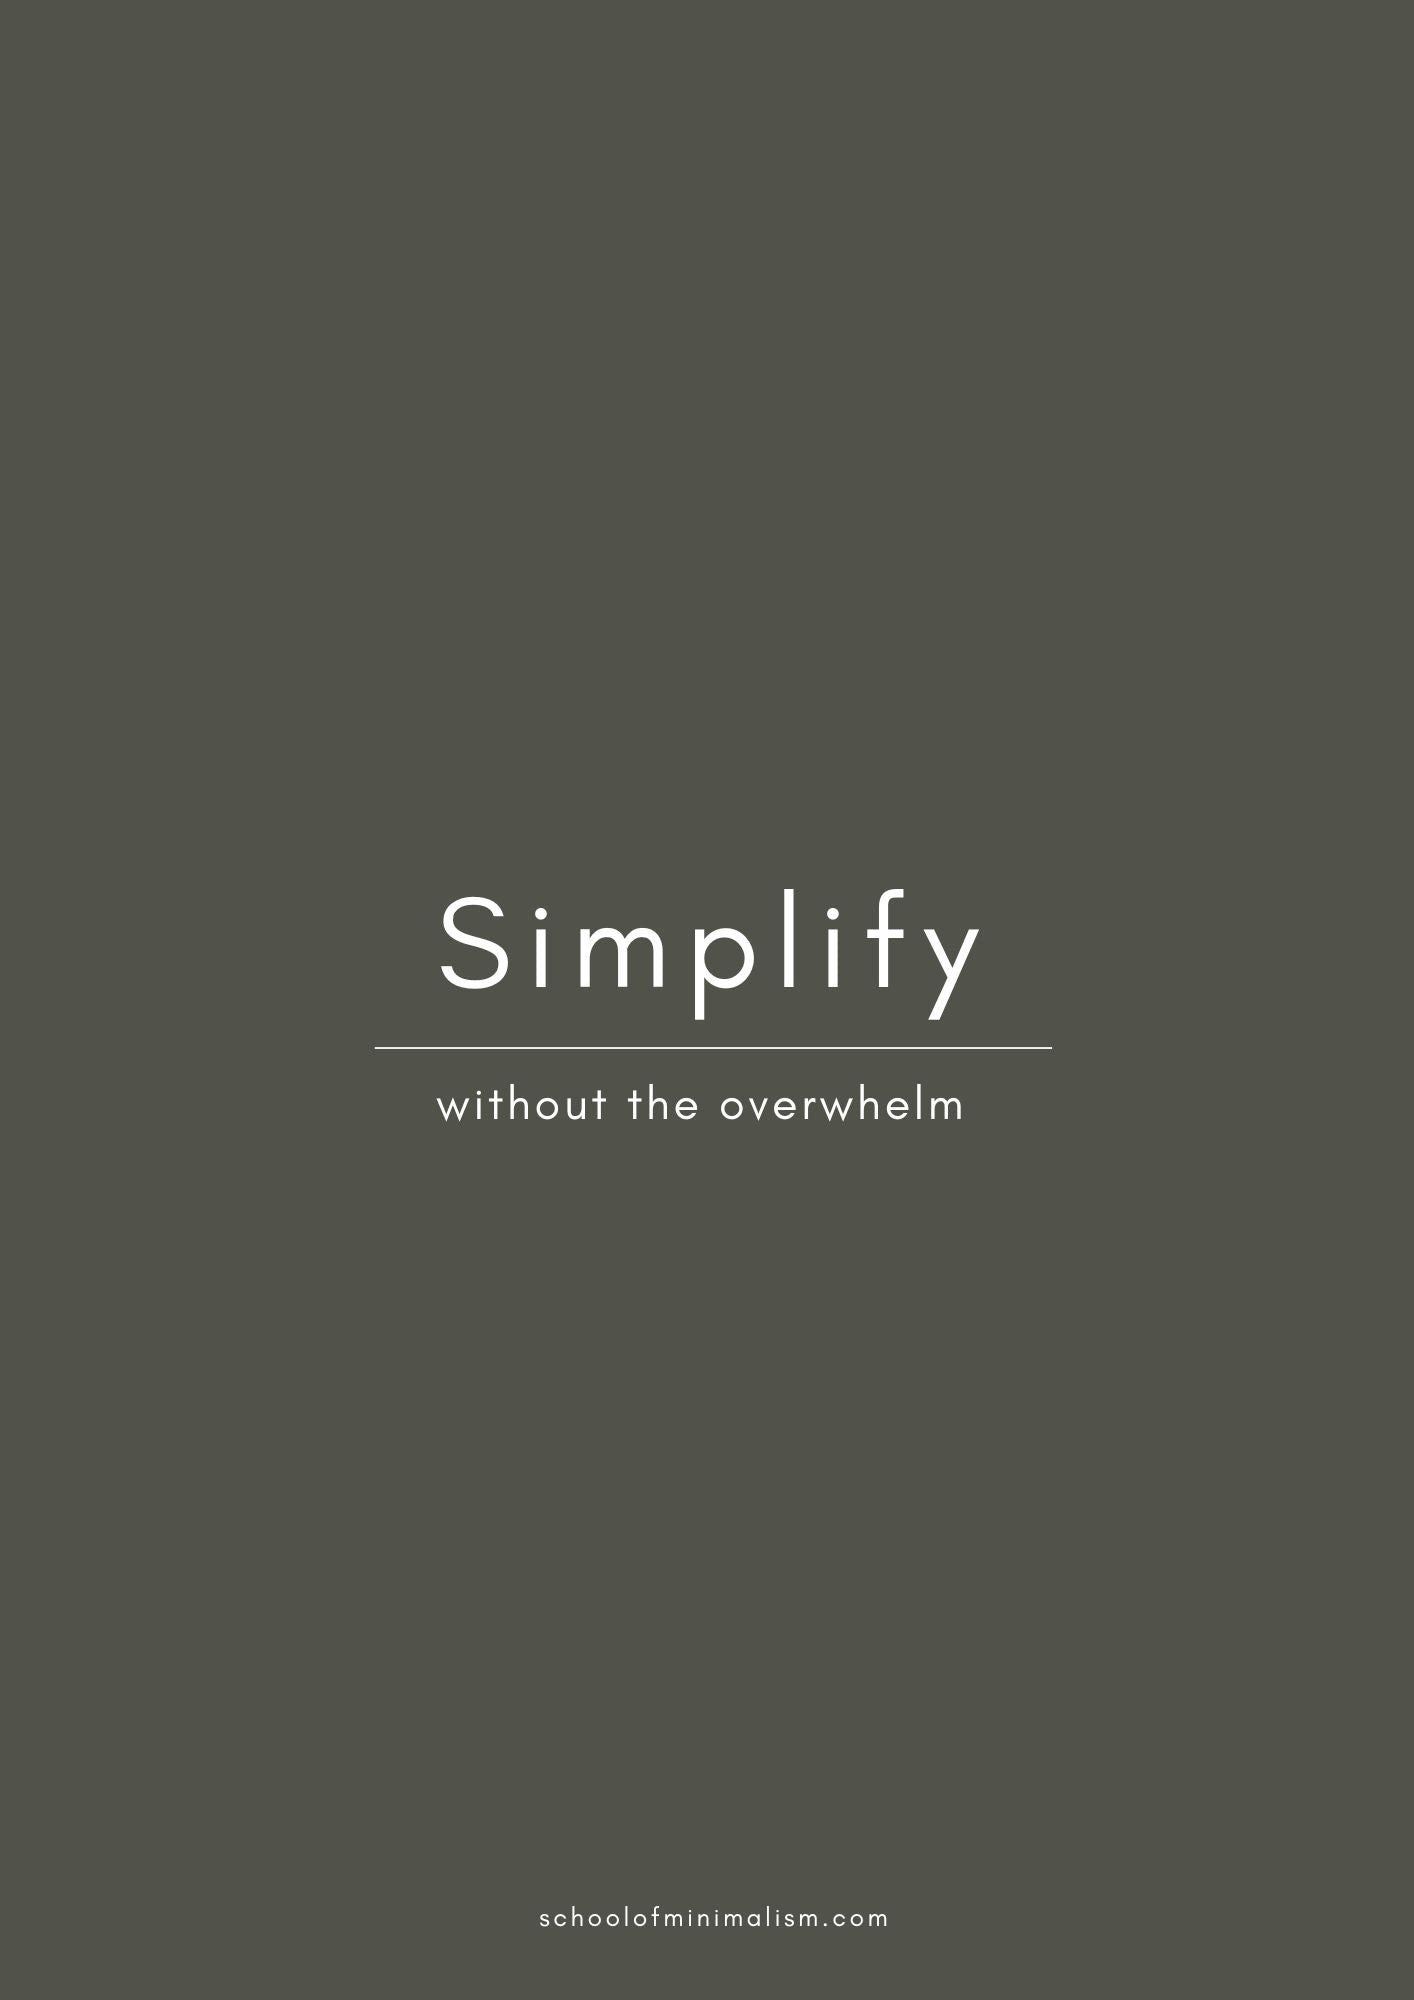 Simplify | without the overwhelm